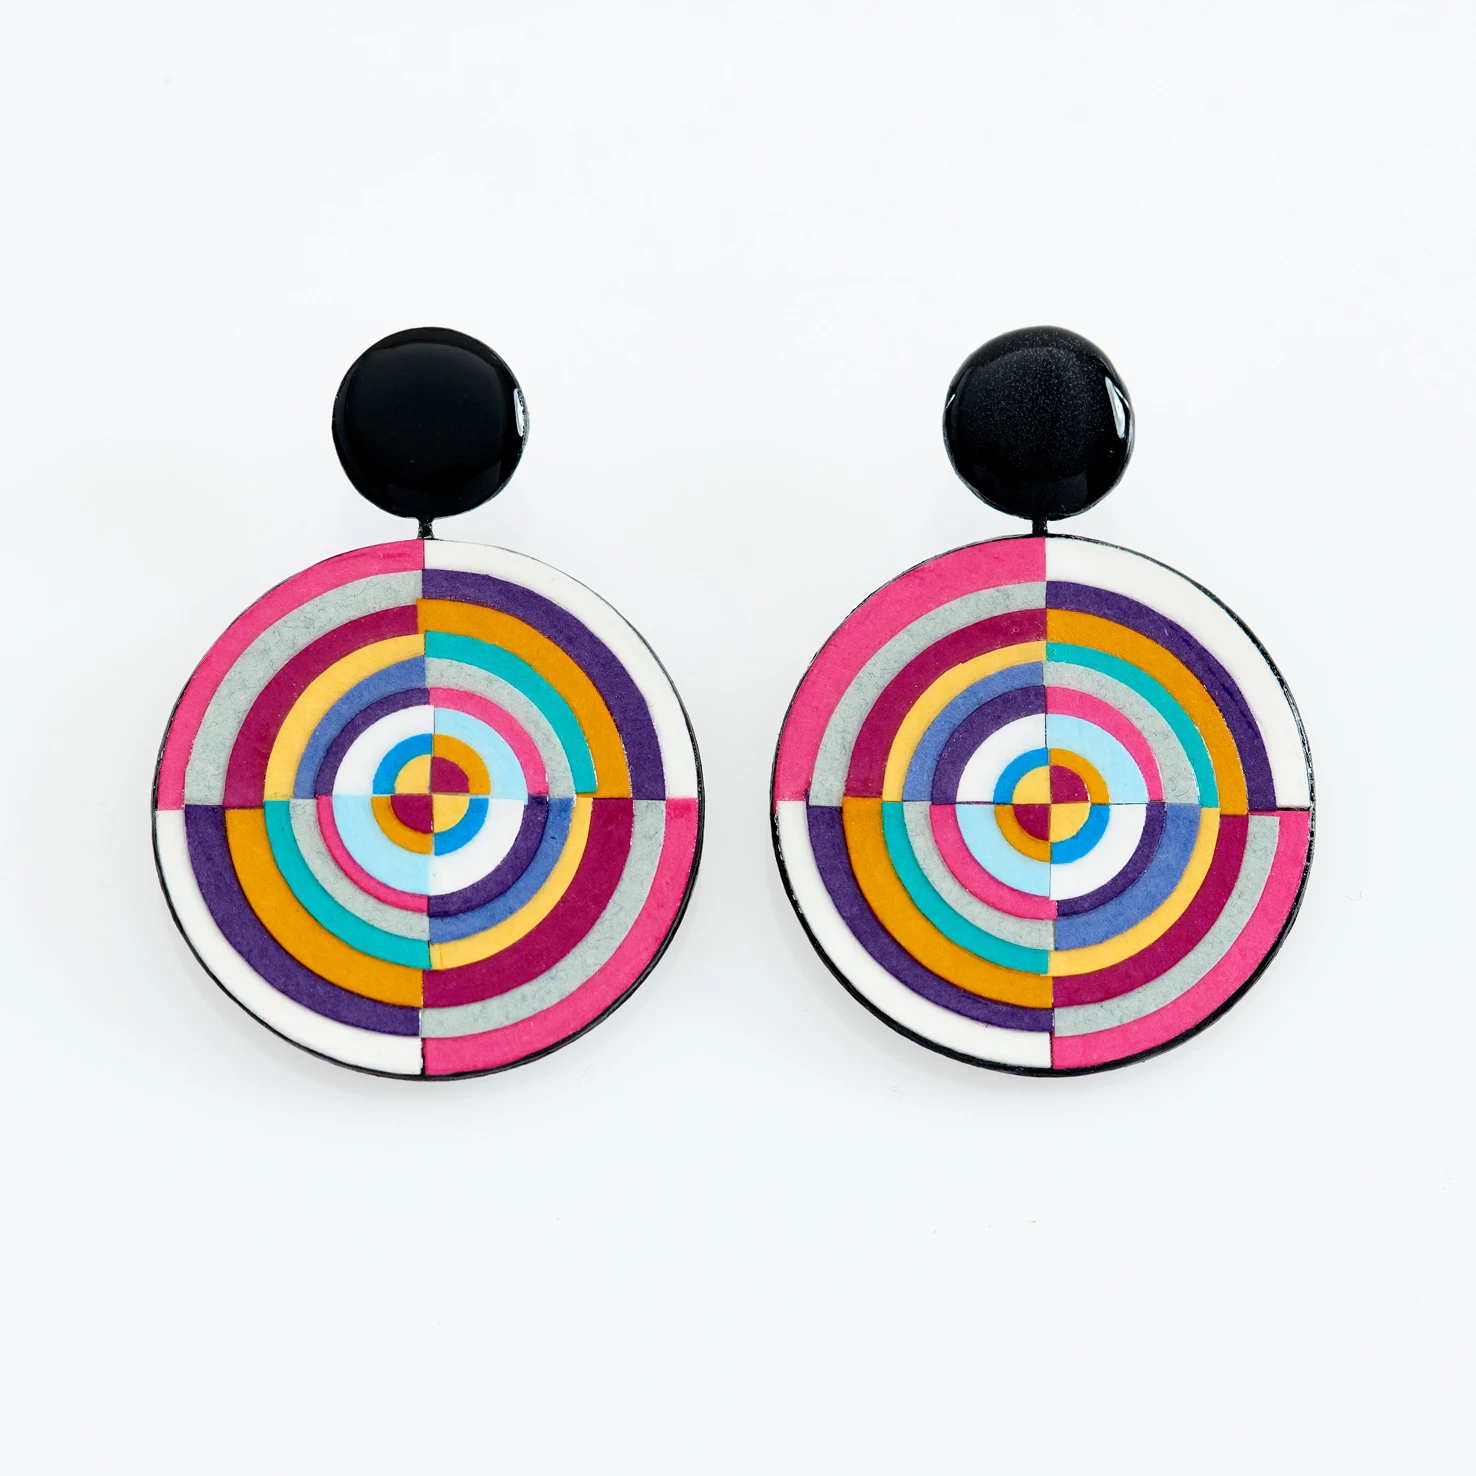 EARRINGS SYNTHESIS OF CIRCLES ‘SAME-CENTERED COLORED CIRCLES’